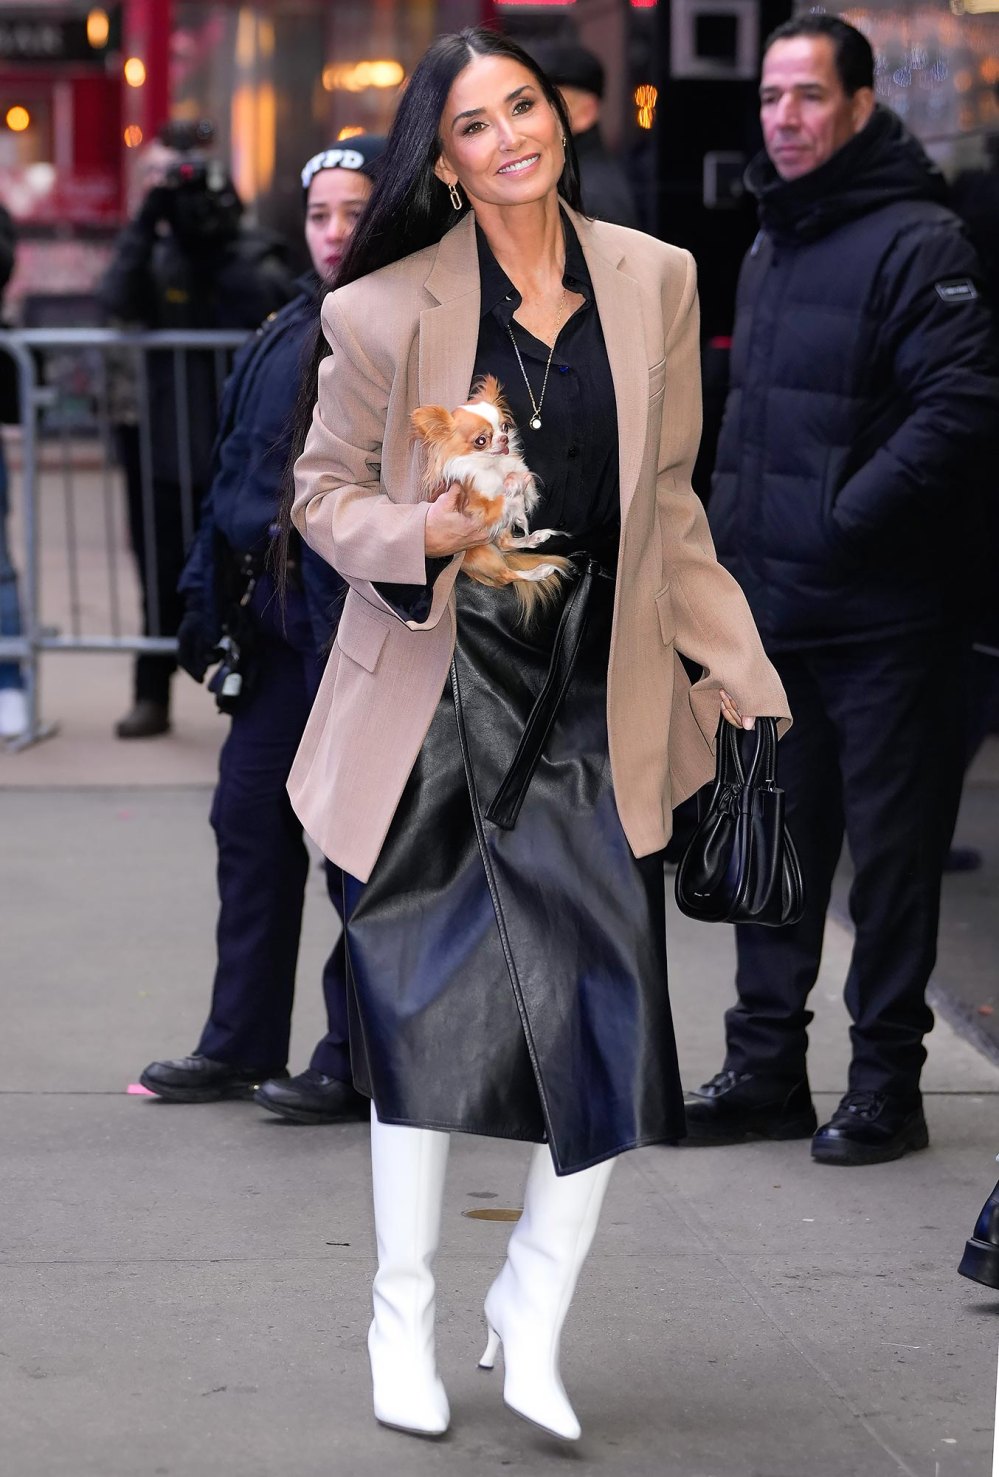 Demi Moore Continues Her Streak of Chic Monochromatic Winter Outfits in New York City